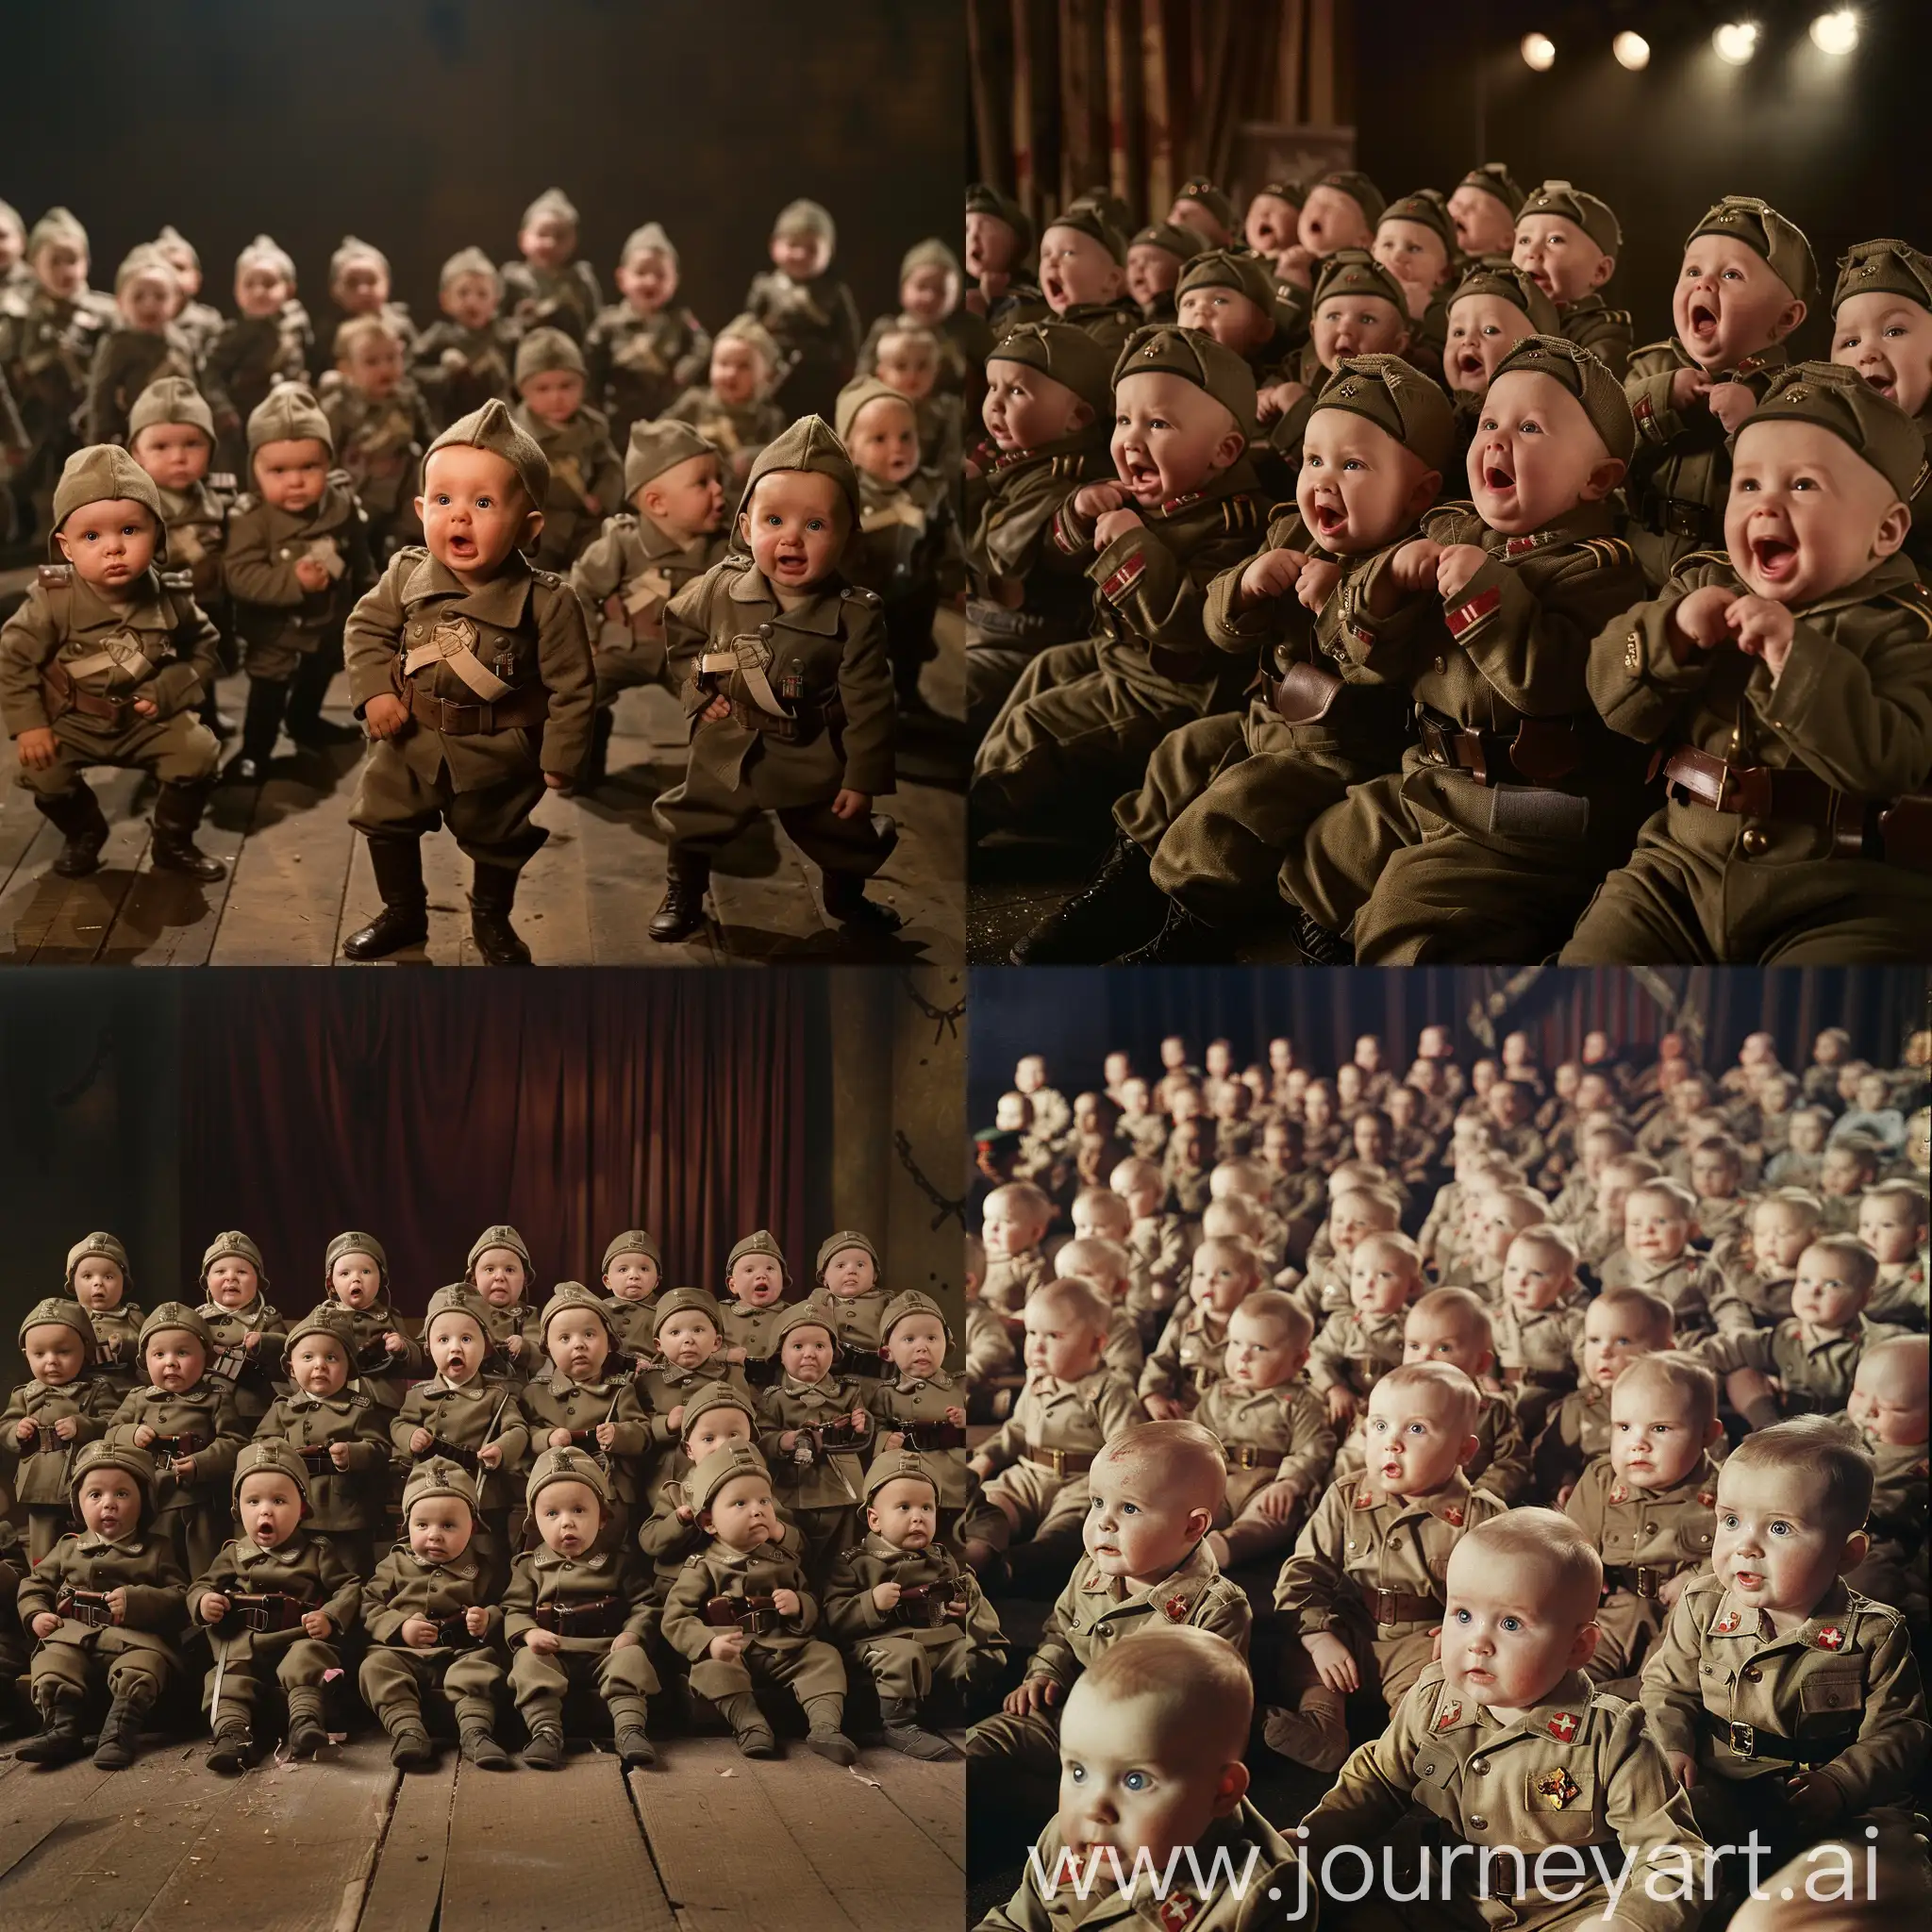 An army of babies in World War II, military uniform, stage, cinematographic lighting